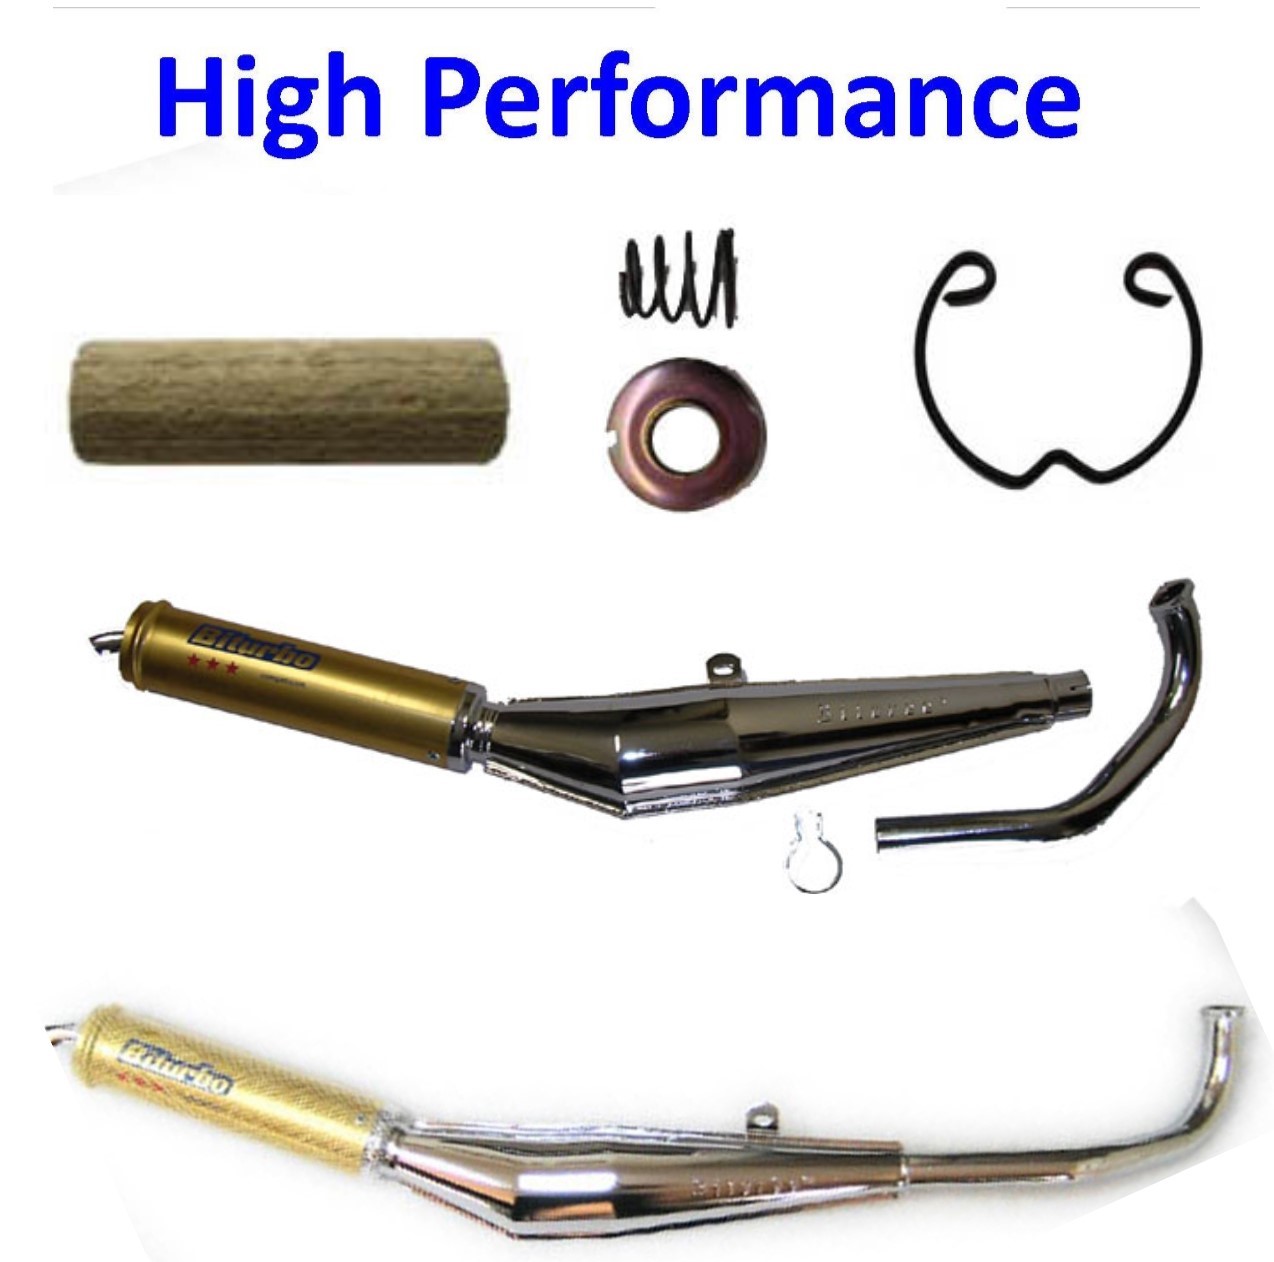 Moped (Tomos, Puch, Etc.) Exhaust Pipes & Parts